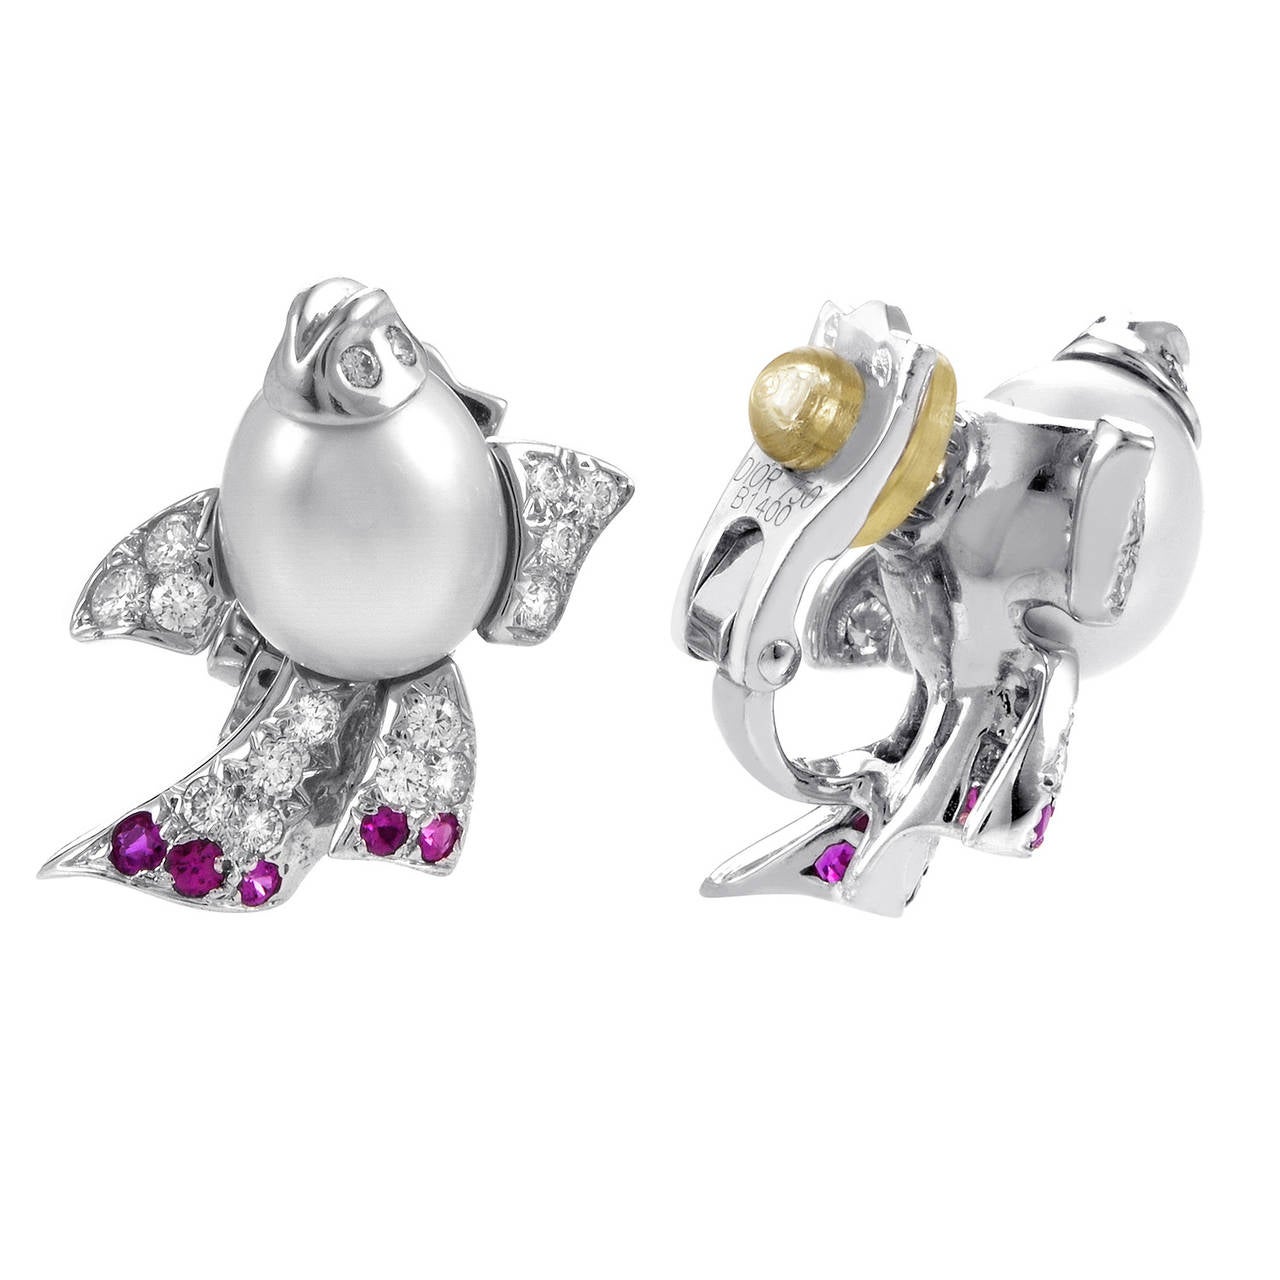 Prepare to delight yourself with the beauty of this pair of clip-on earrings from Dior. The earrings are made of 18K white gold and are set with diamonds, pearls, and rubies.